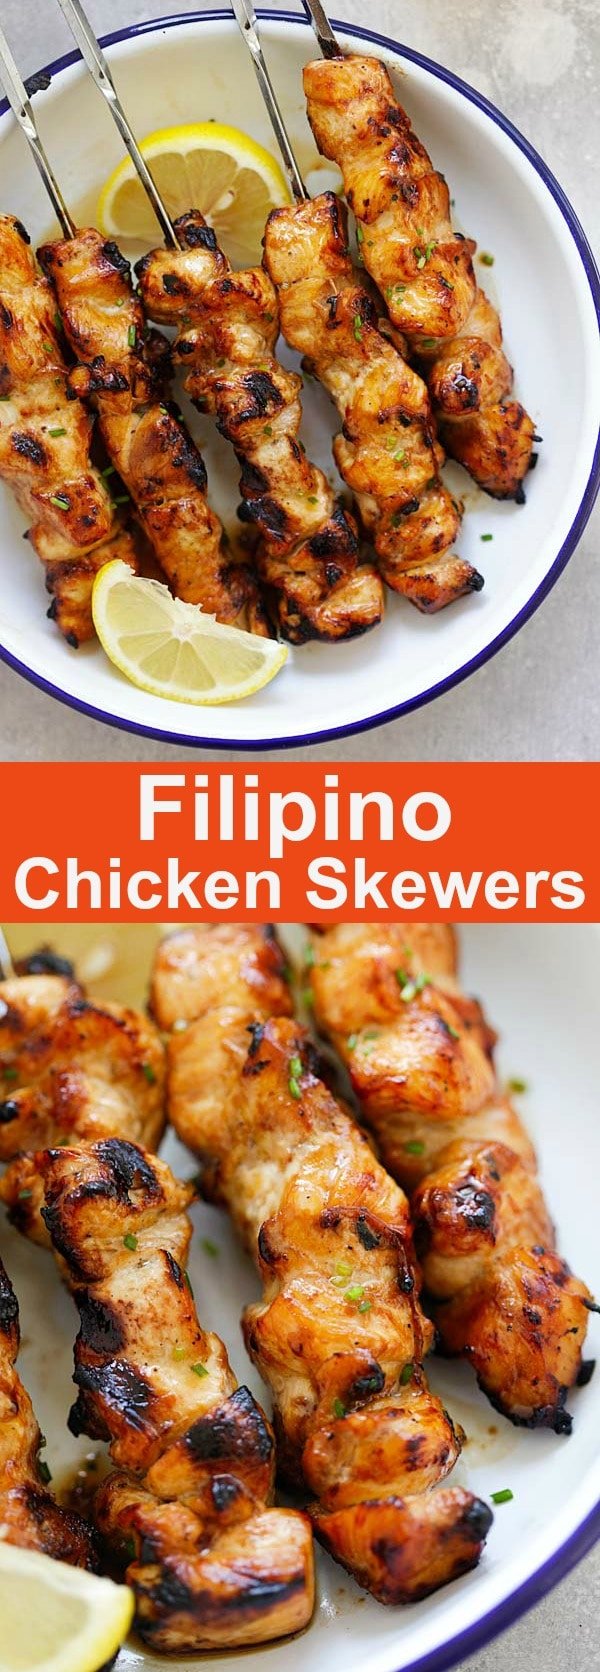 Filipino Chicken Skewers – juicy, moist and savory chicken kebab seasoned Filipino-style with soy sauce, banana ketchup and garlic. Absolutely delicious and a crowd pleaser | rasamalaysia.com